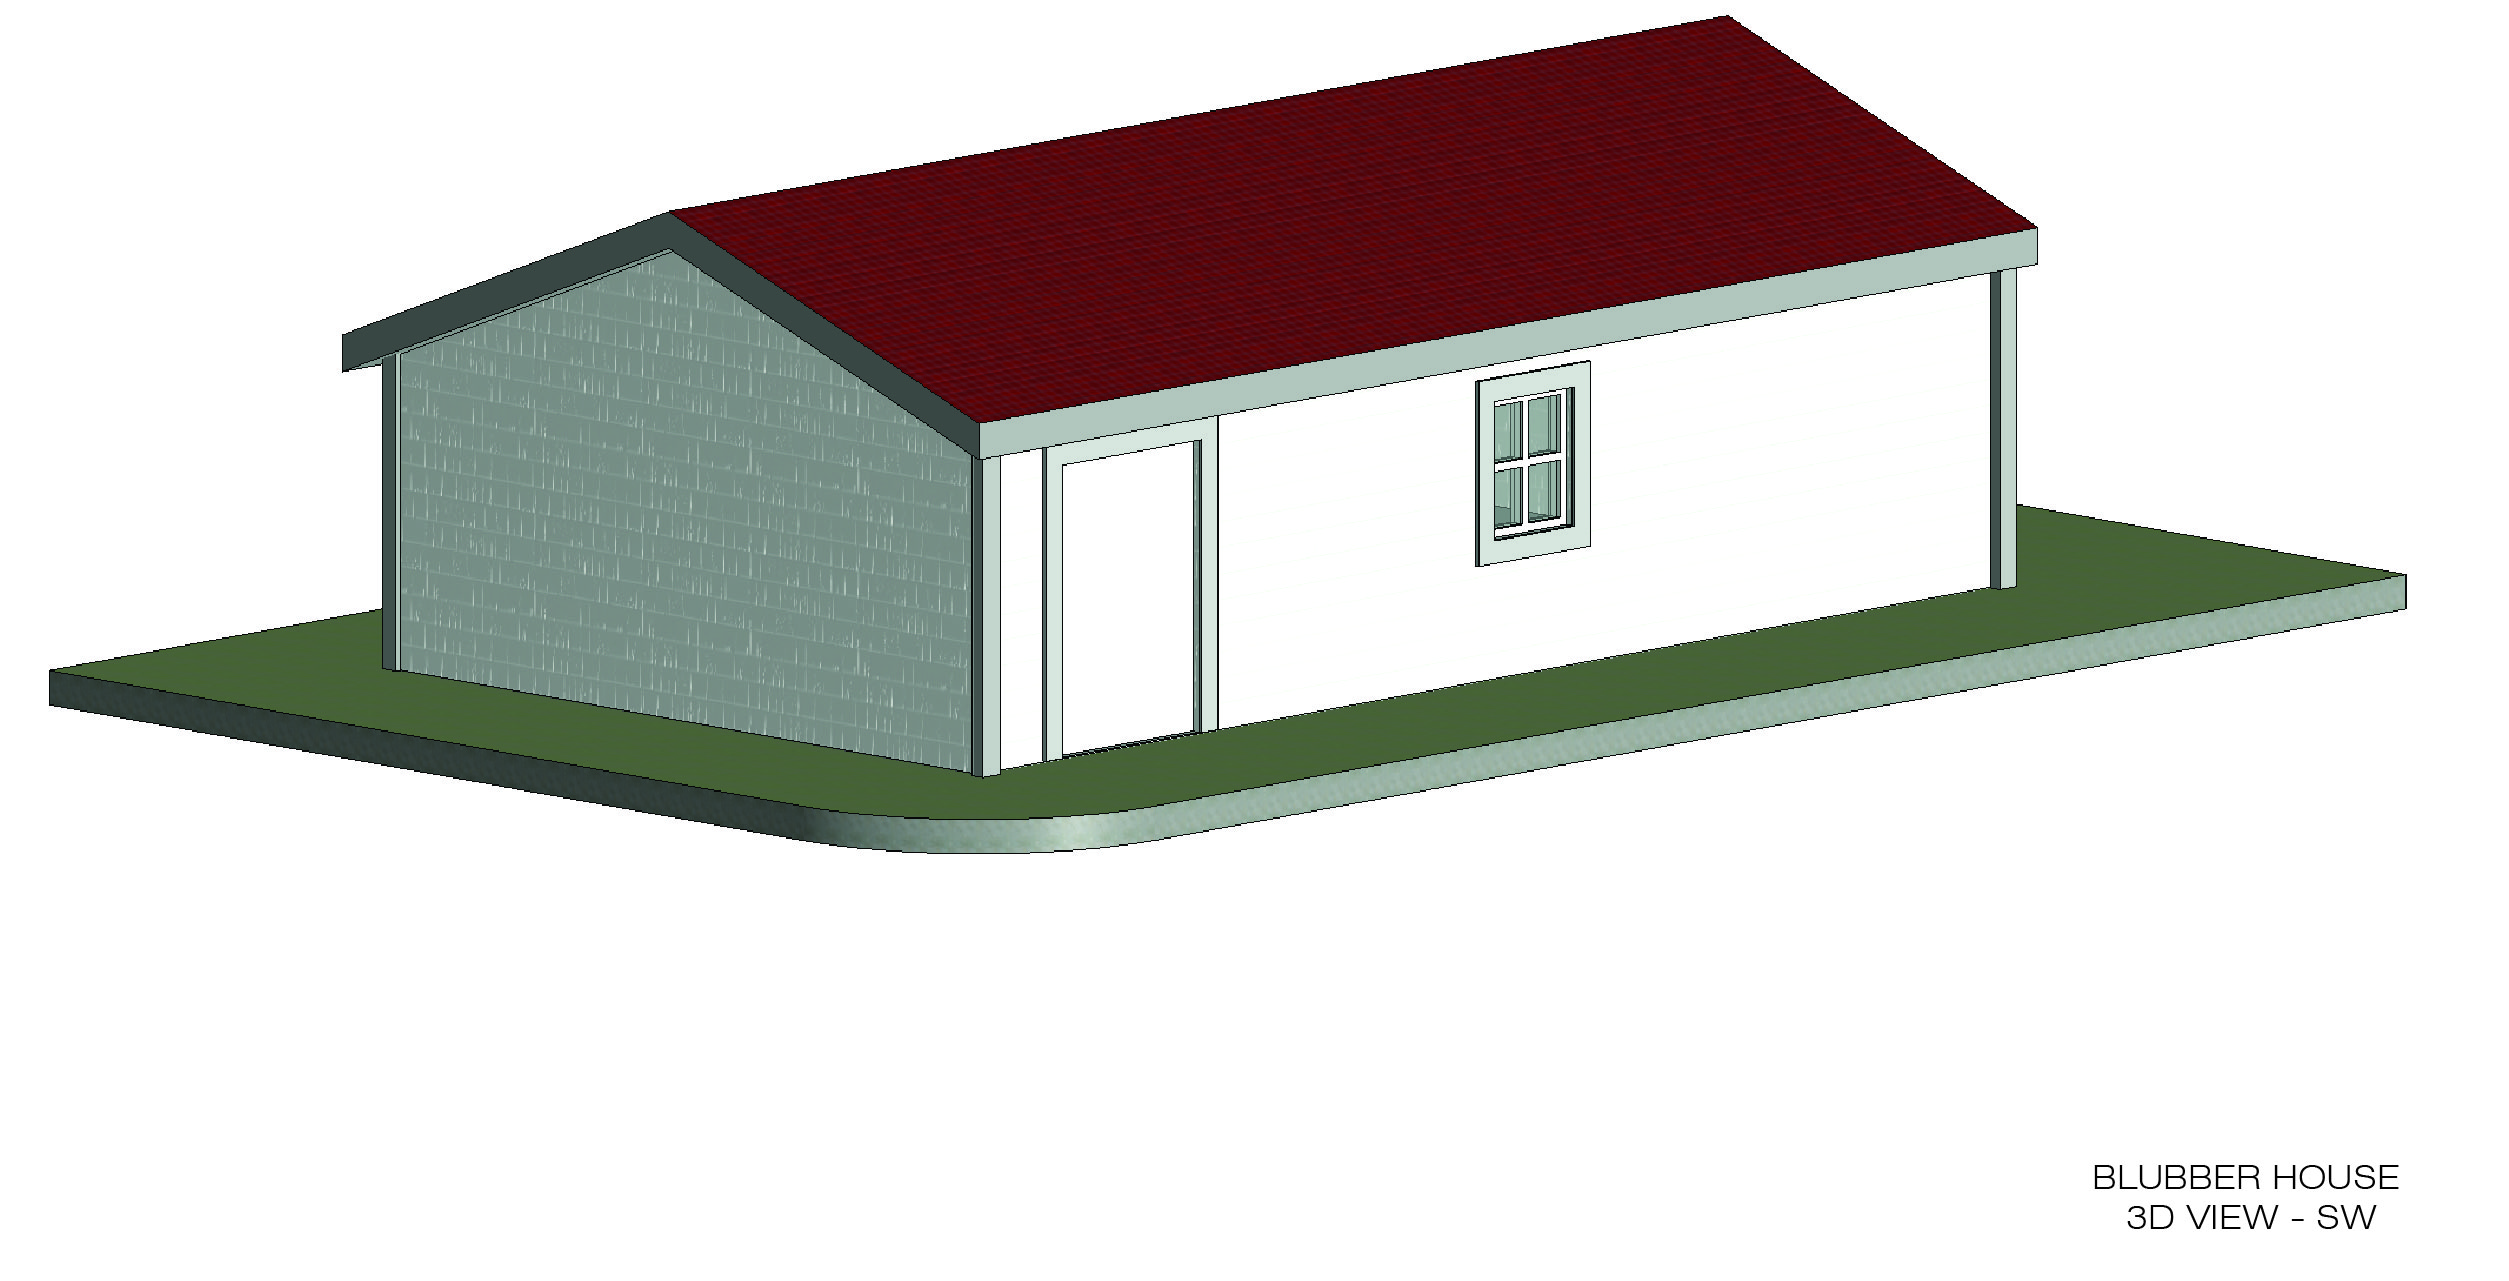 3D view of the blubber house, created in Revit based off the documentation with the terrestrial laser scanner.